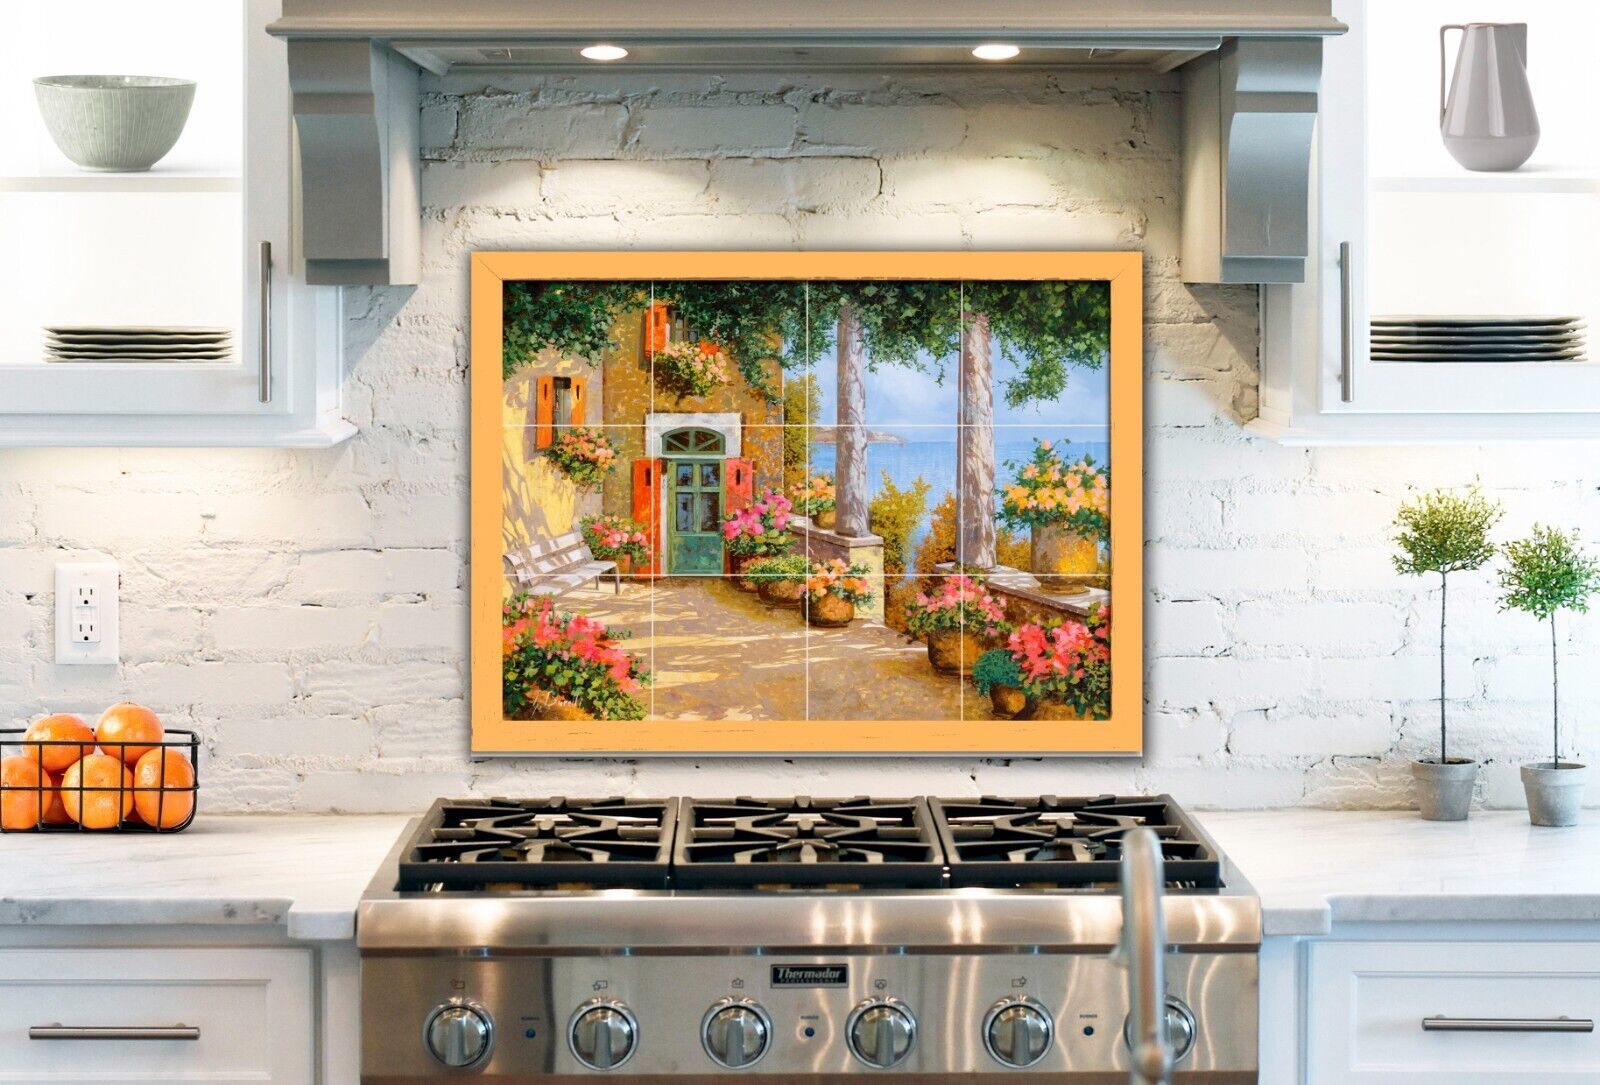 Primary image for discarded crust country farm animals chickens bird ceramic tile mural backsplash